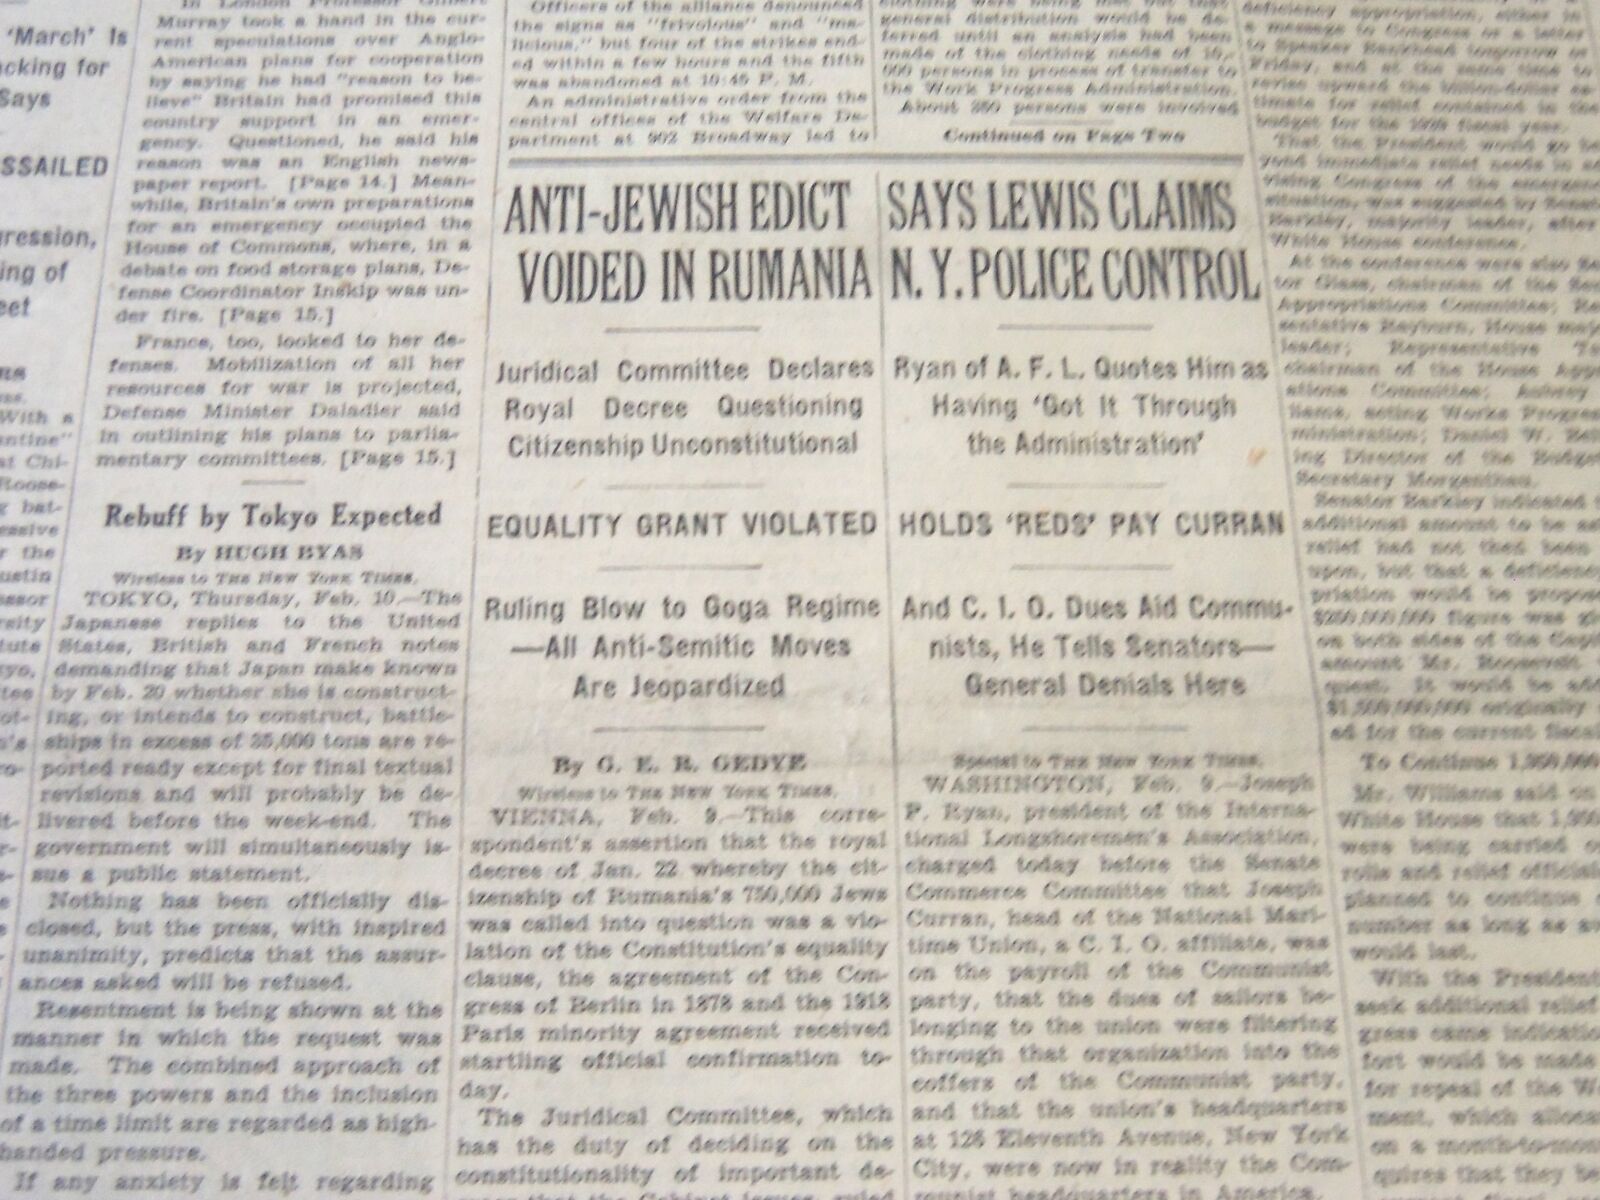 1938 FEBRUARY 10 NEW YORK TIMES - ANTI JEWISH EDICT VOIDED IN RUMANIA - NT 6278